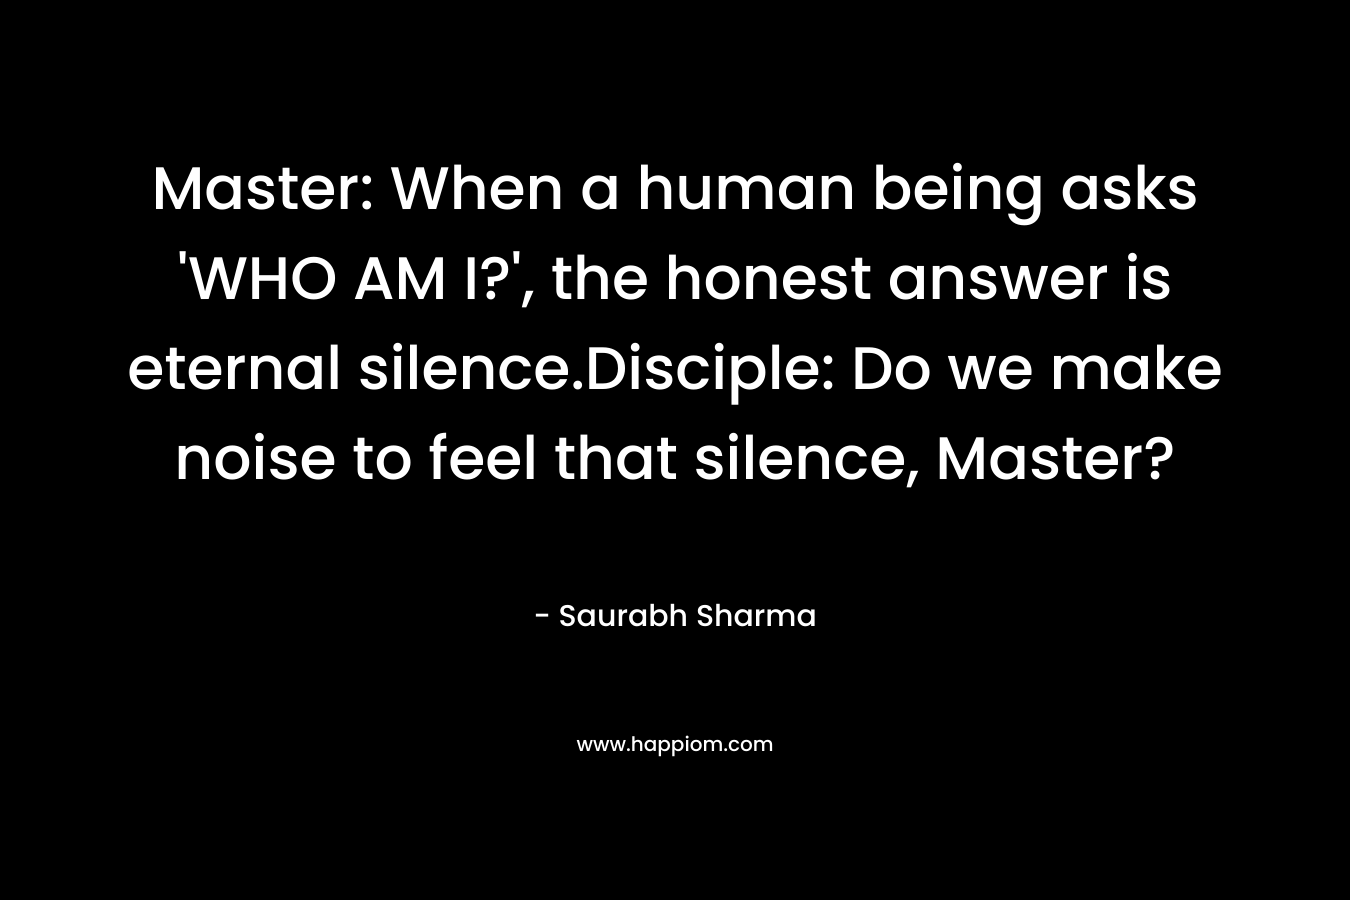 Master: When a human being asks ‘WHO AM I?’, the honest answer is eternal silence.Disciple: Do we make noise to feel that silence, Master? – Saurabh Sharma